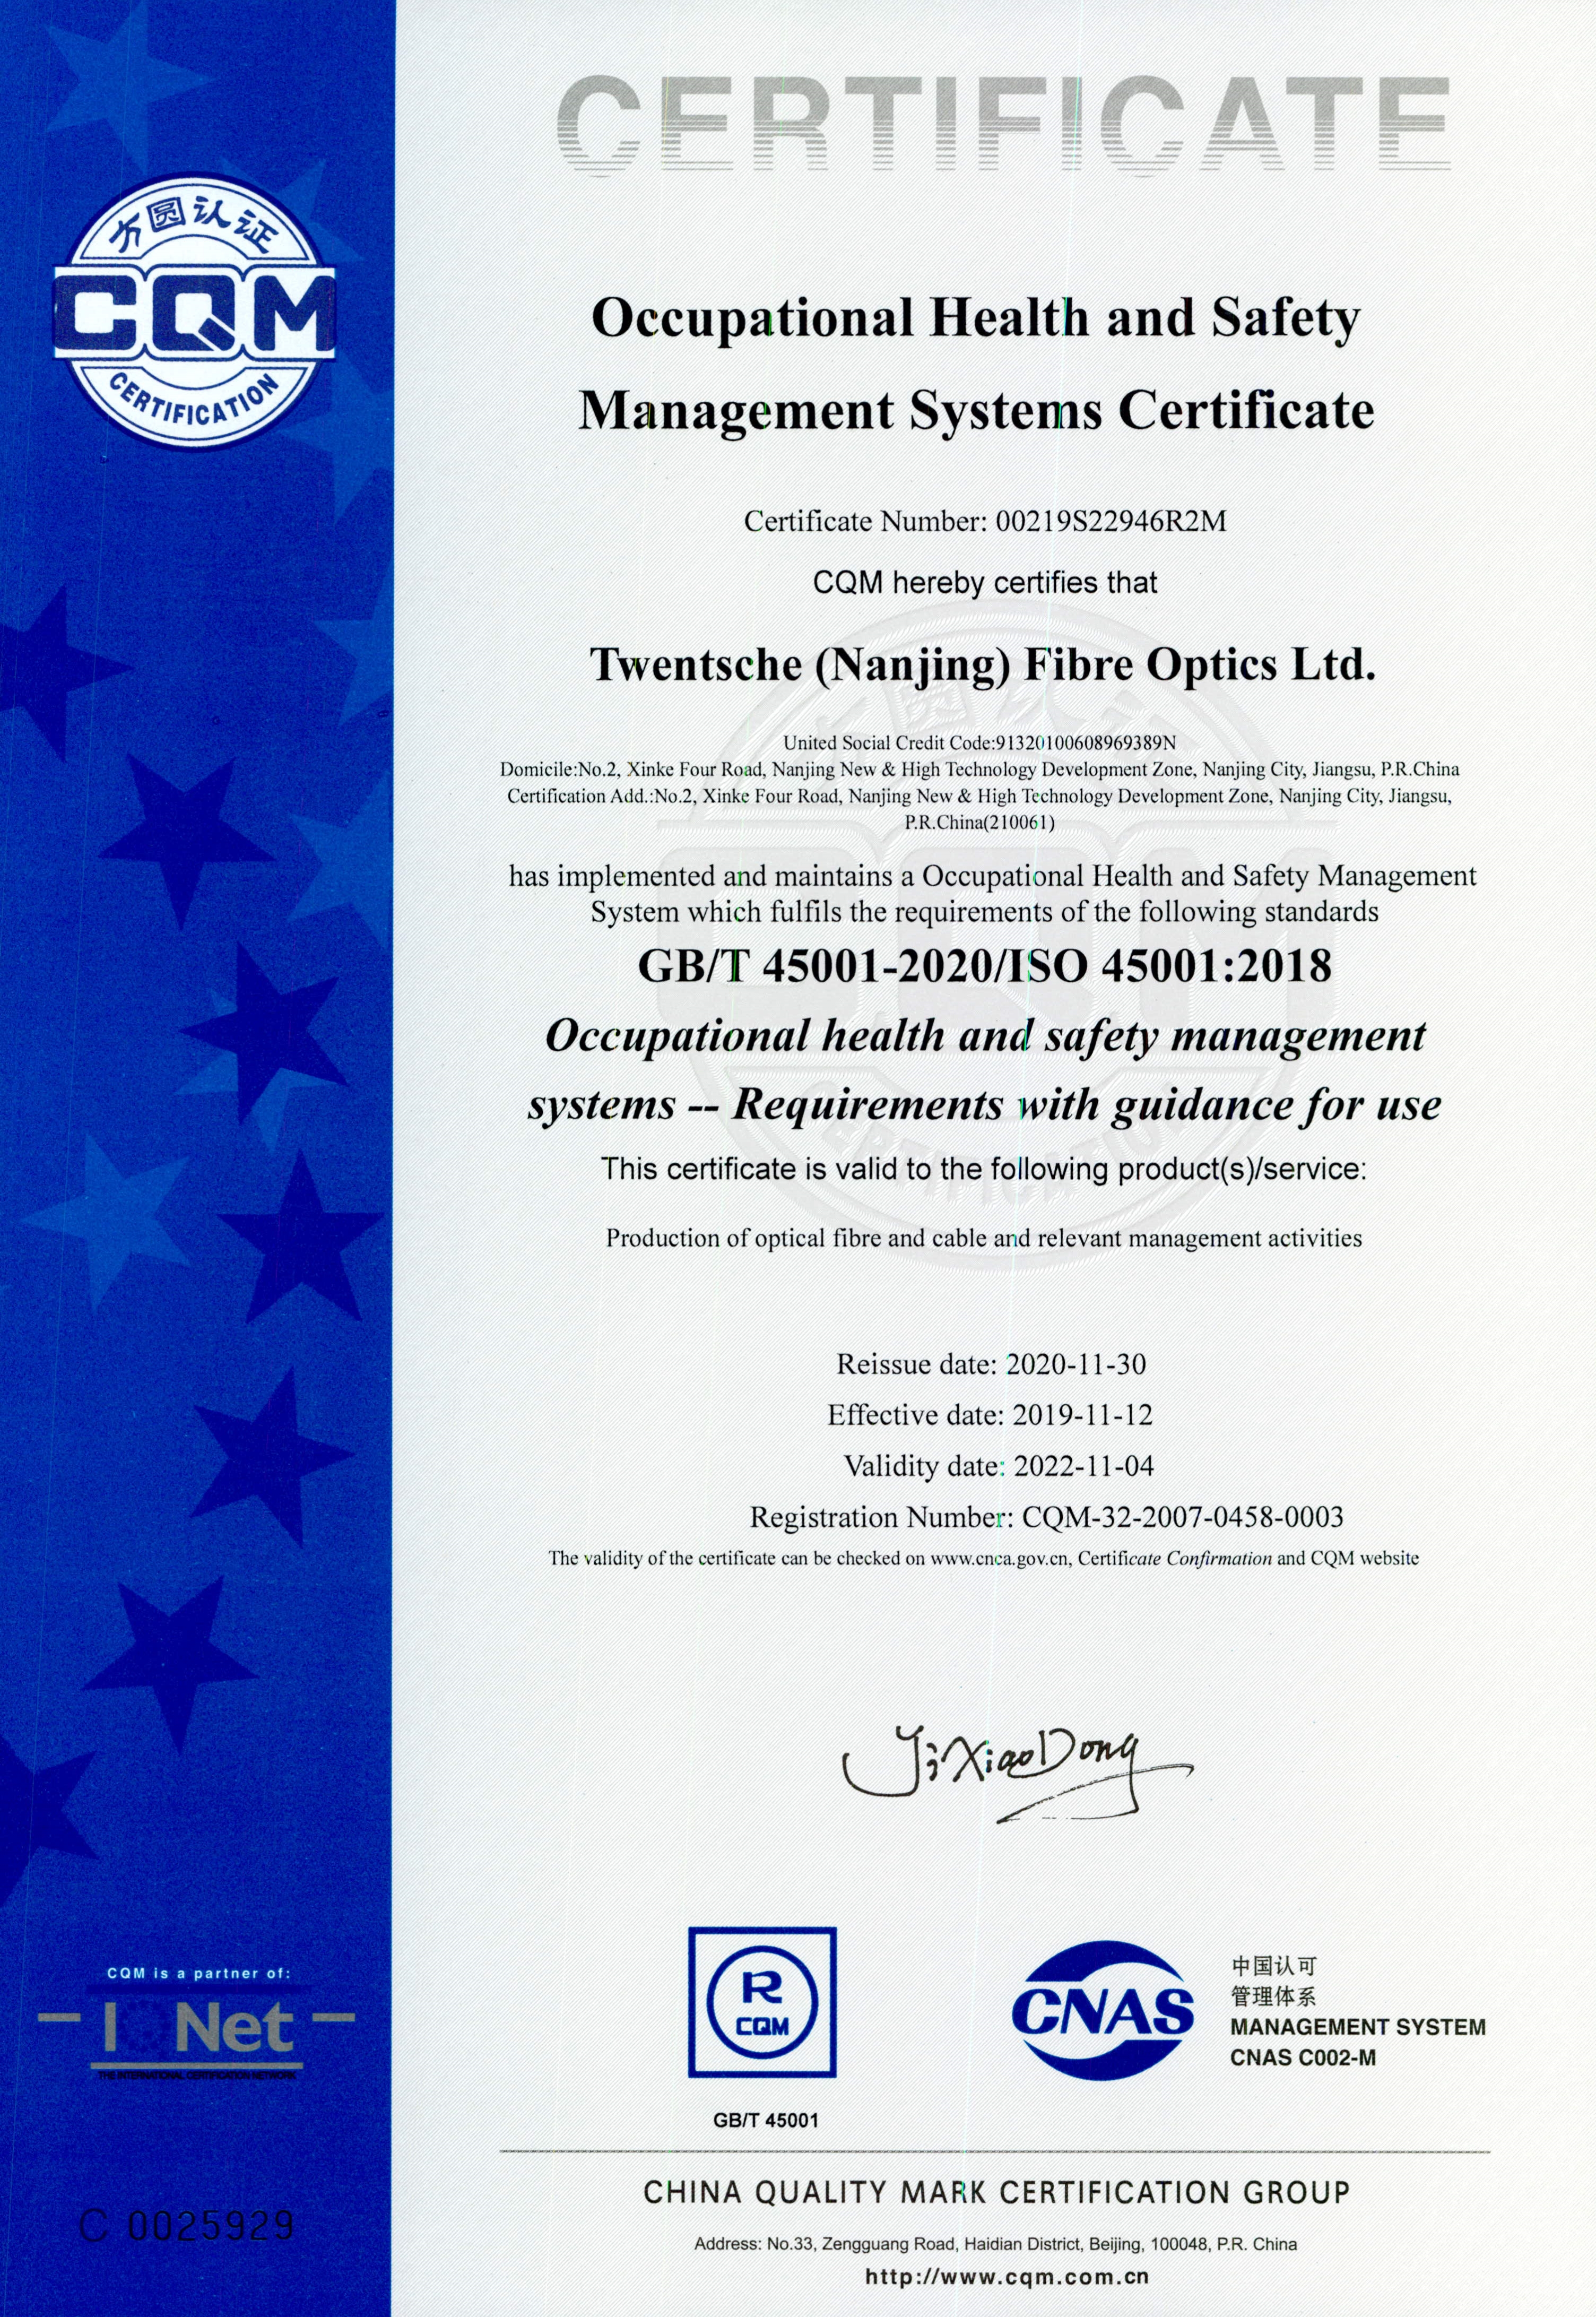 TFO has passed ISO45001 transfer certification and obtained the certificate